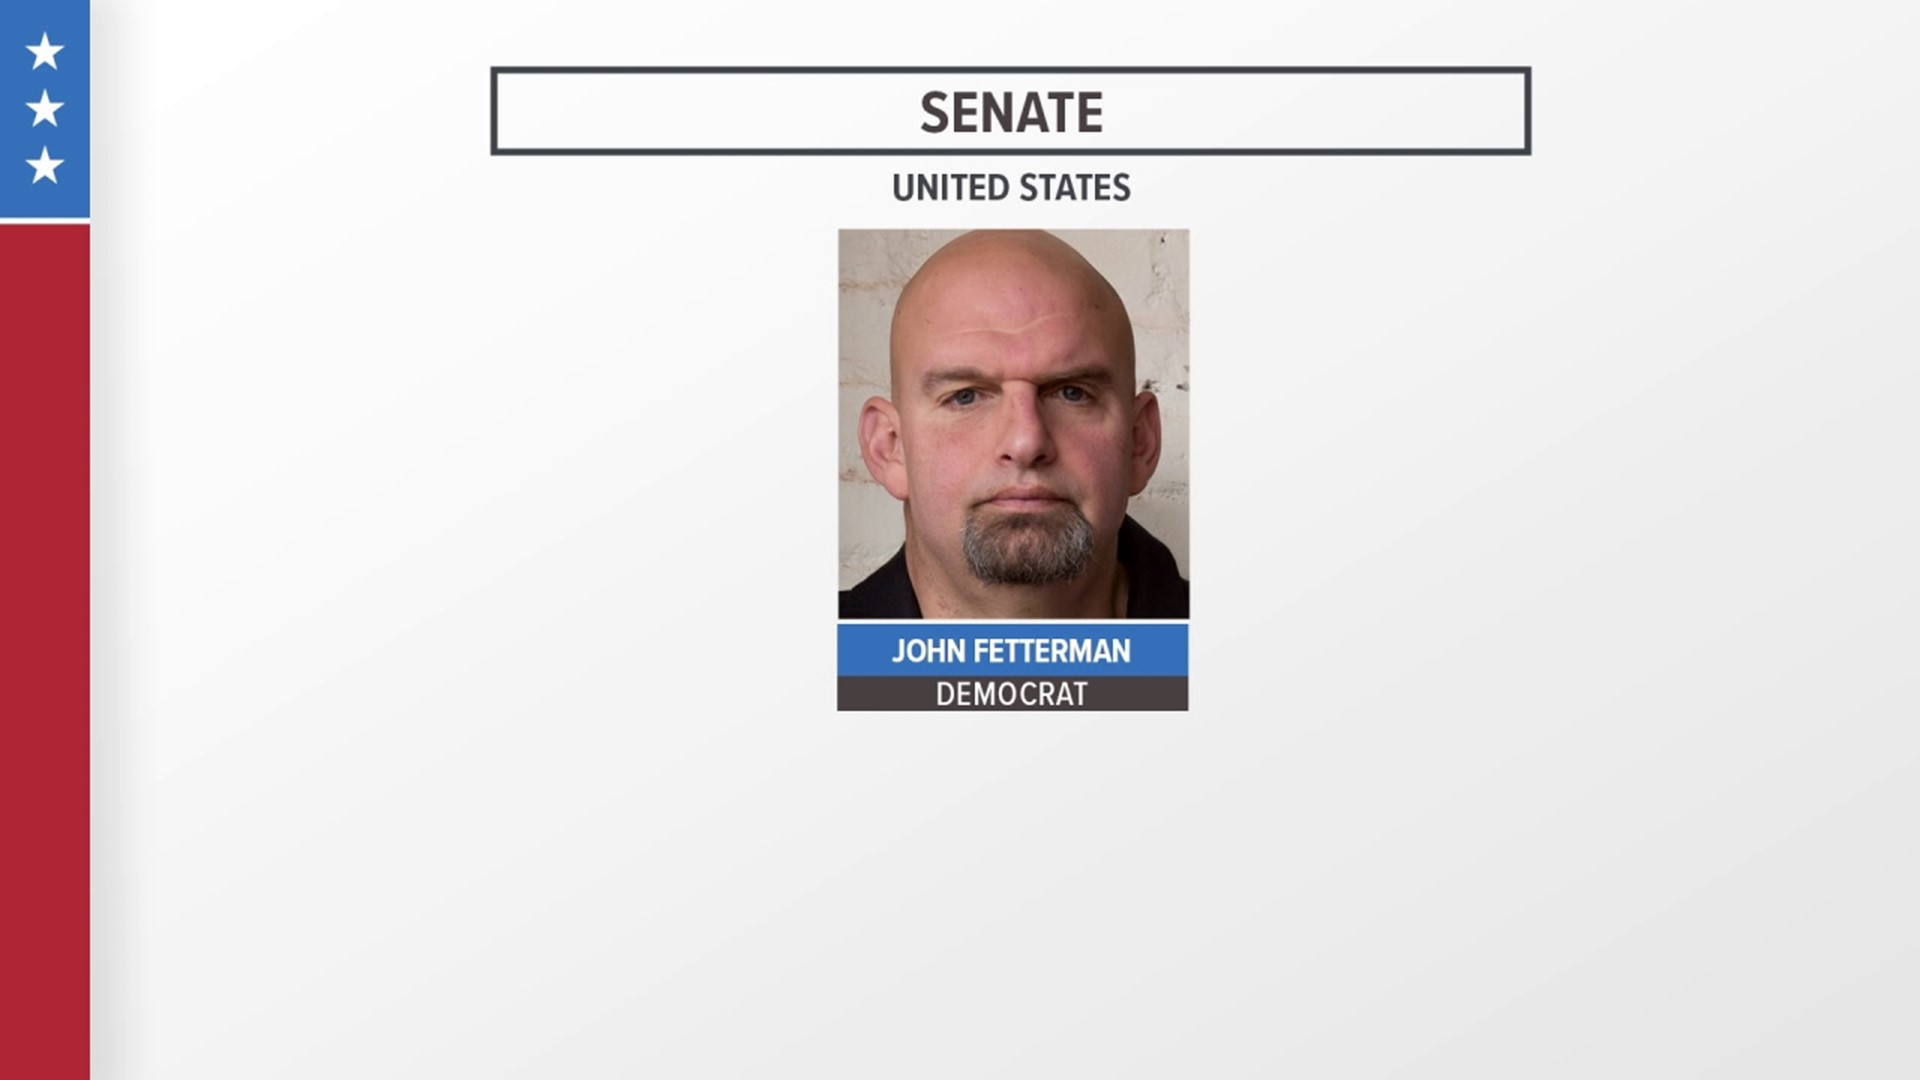 John Fetterman issued a statement on Sunday detailing his condition and determination to continue his campaign for U.S. Senate.